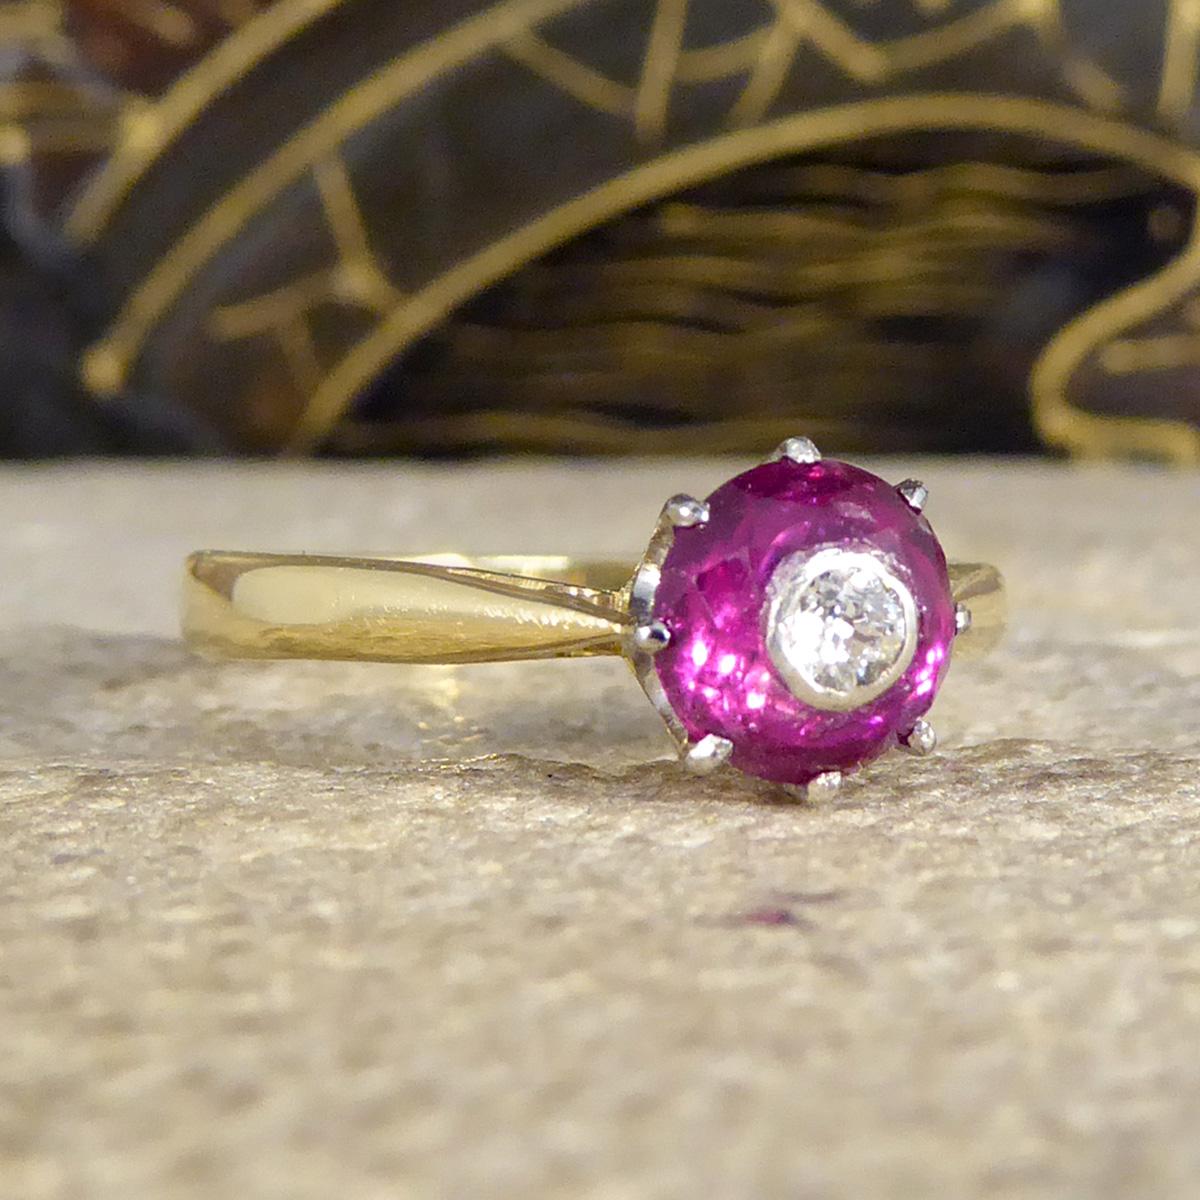 This lovely ring was crafted in the 1920's and features a beautifully coloured pink/red paste stone which resembles a Ruby set with an Old European Cut Diamond in the centre giving the aesthetic of an eye, such an unusual and intriguing style